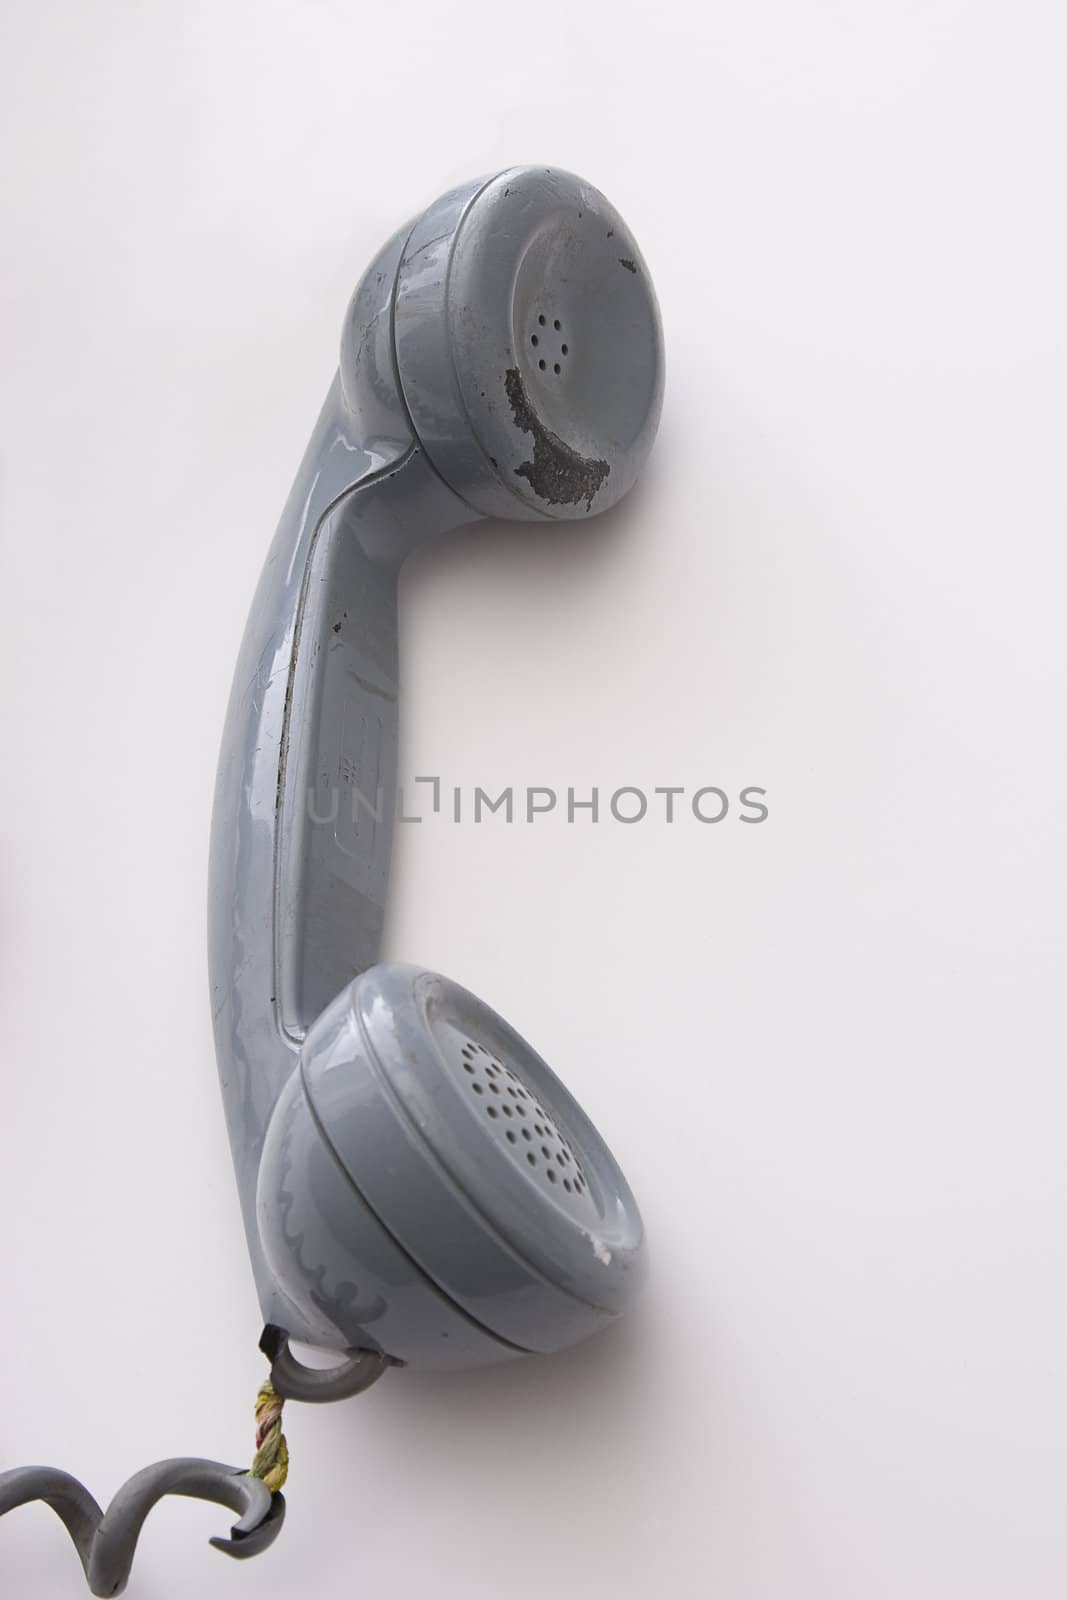 dirty vintage gray handset with pelling paint and expose wired